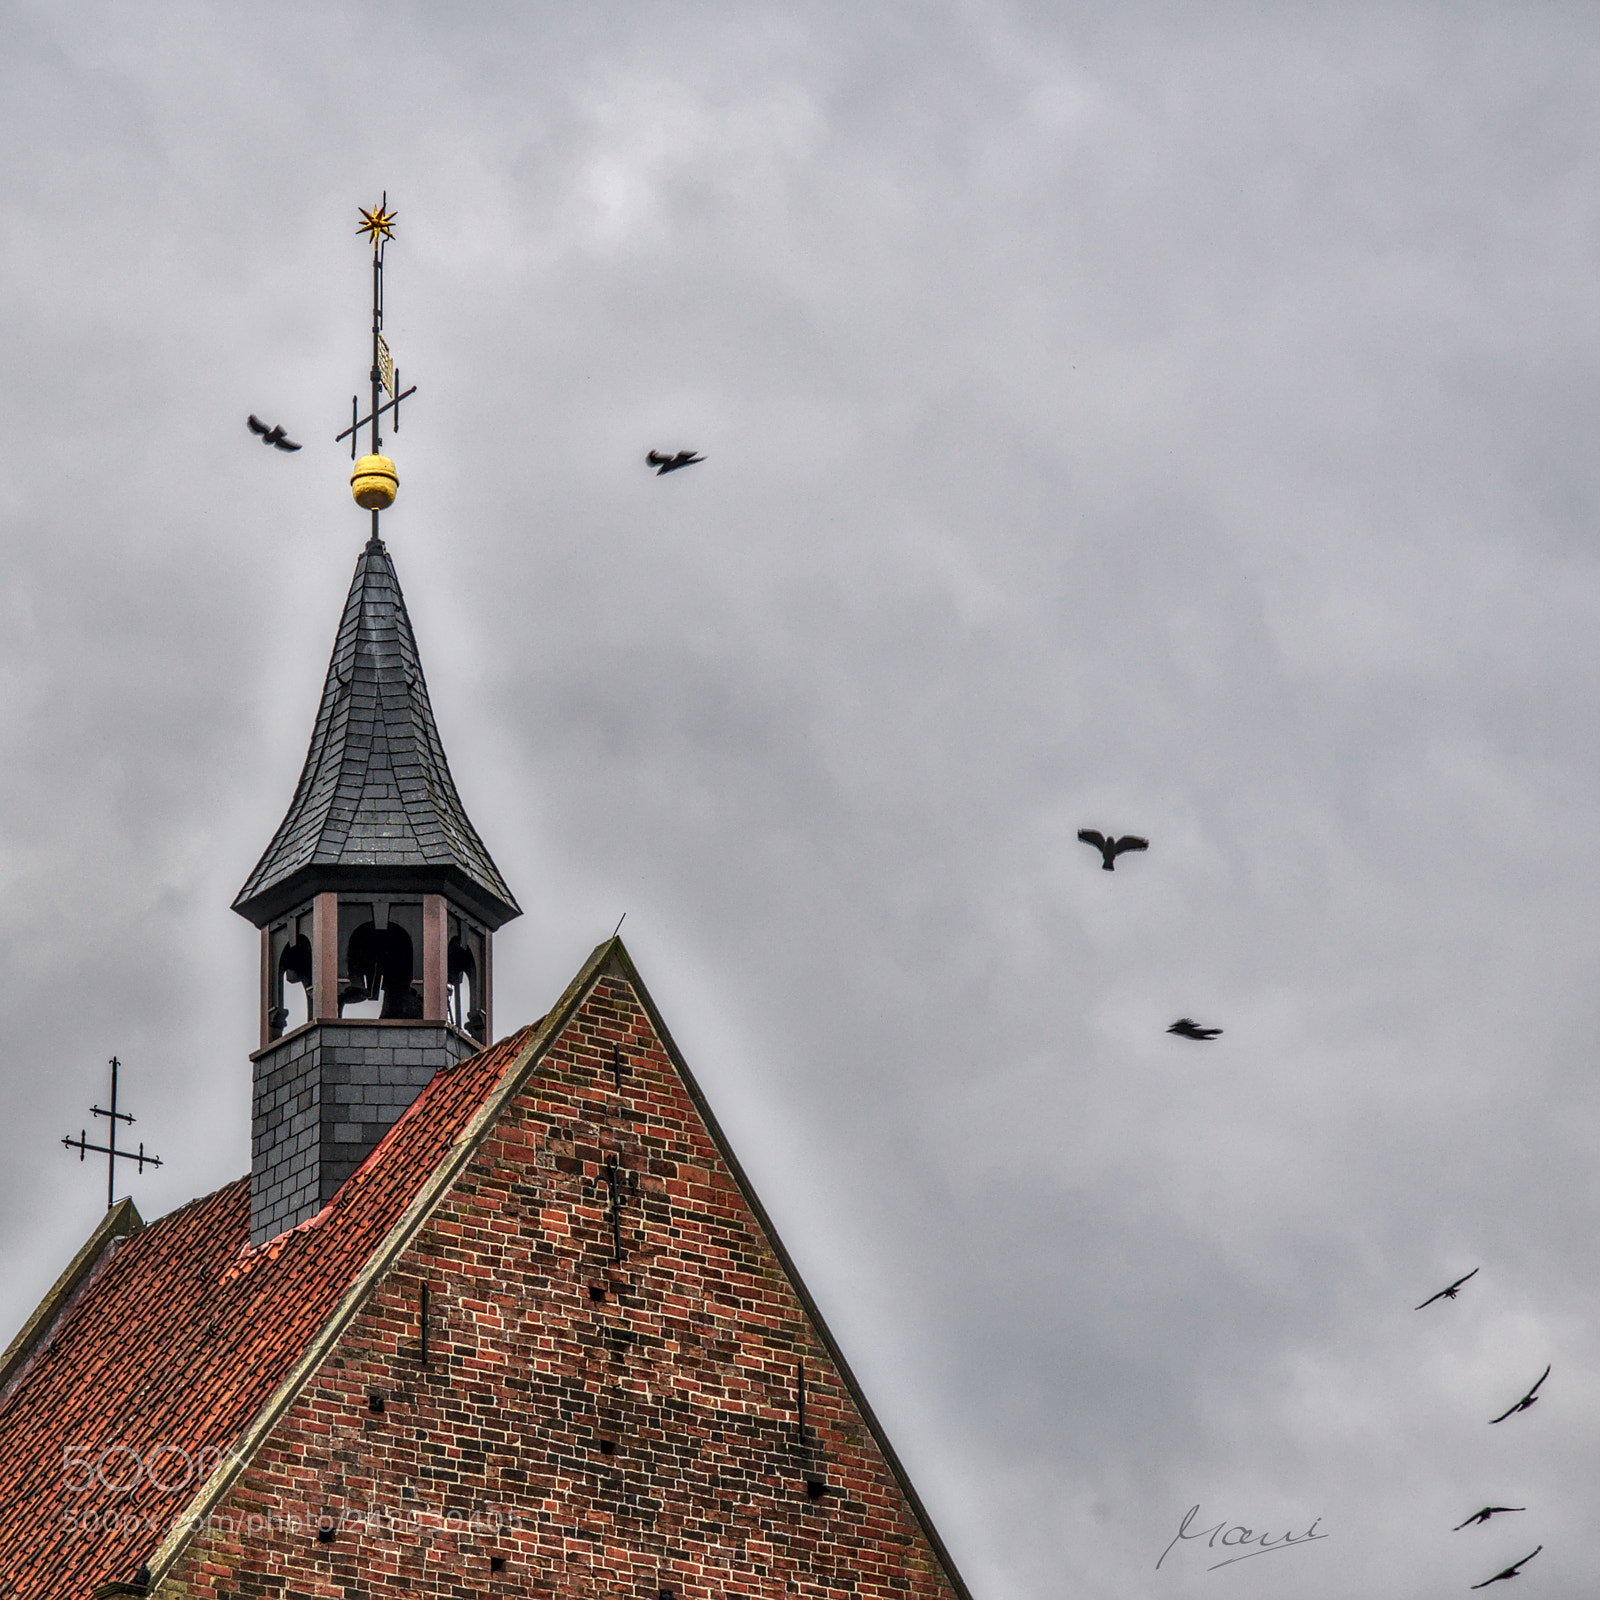 Nikon D90 sample photo. The church bell and photography